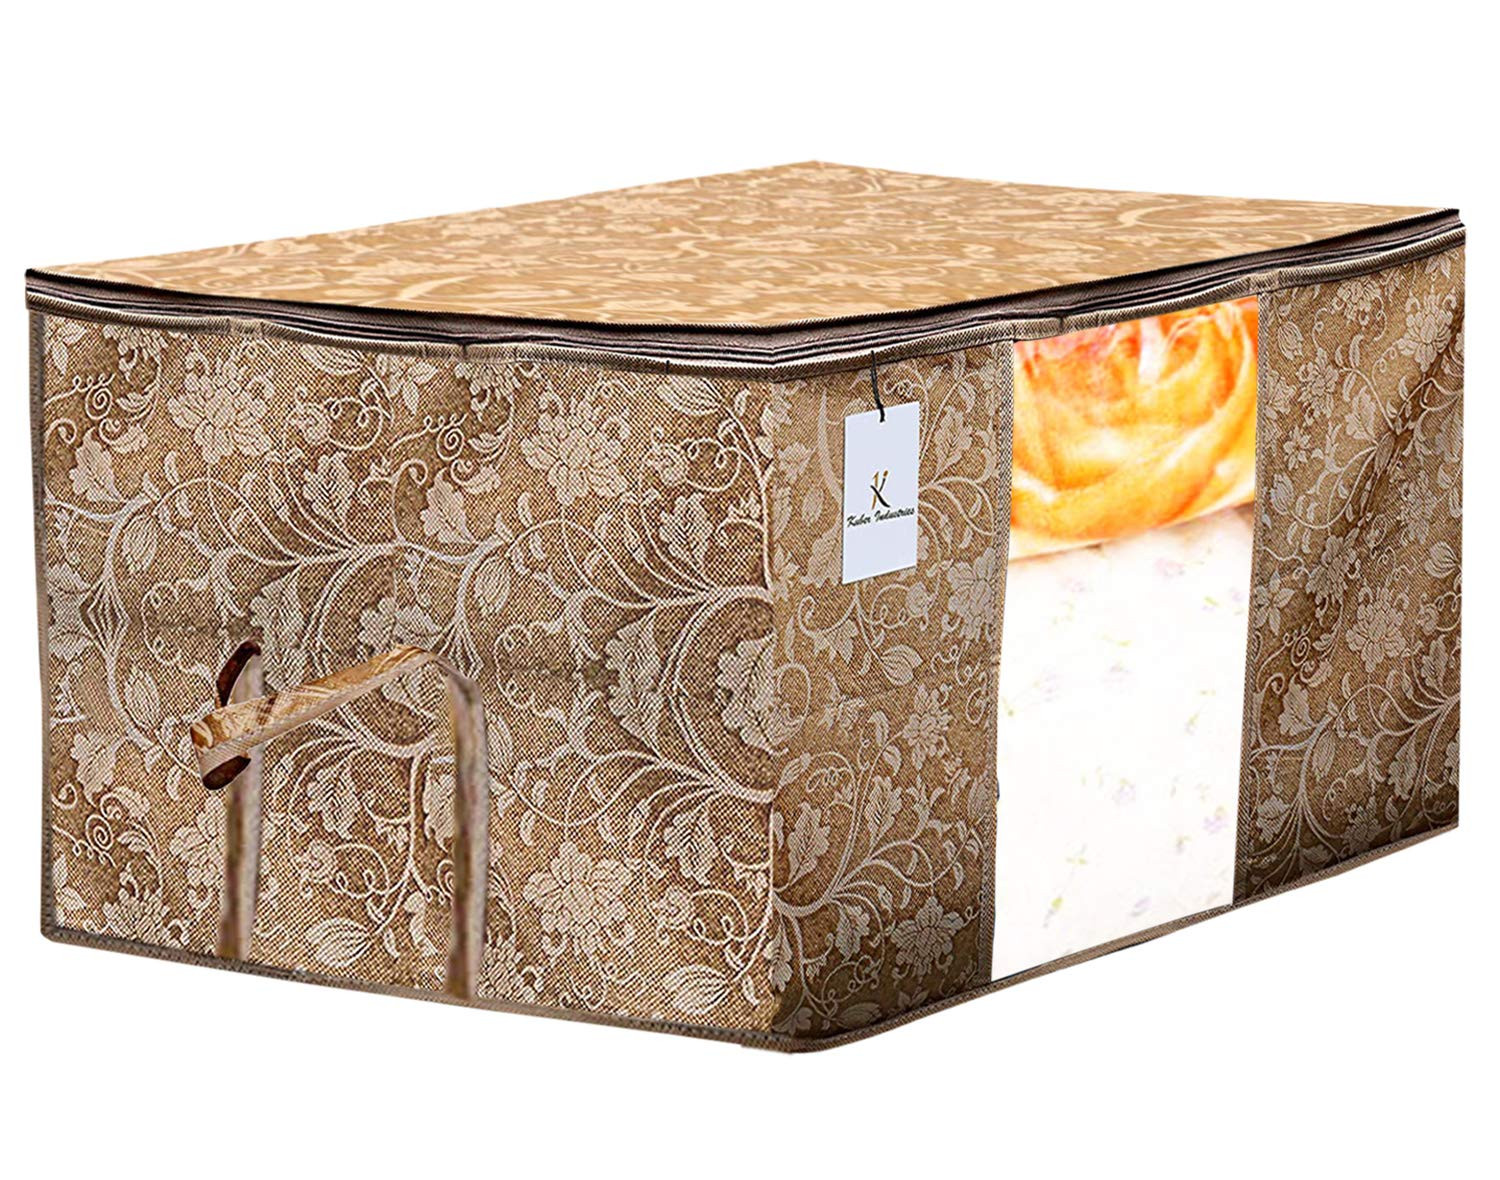 Kuber Industries Metalic Printed Non Woven Saree Cover And Underbed Storage Bag, Storage Organiser, Blanket Cover, Beige & Ivory Red -CTKTC42383